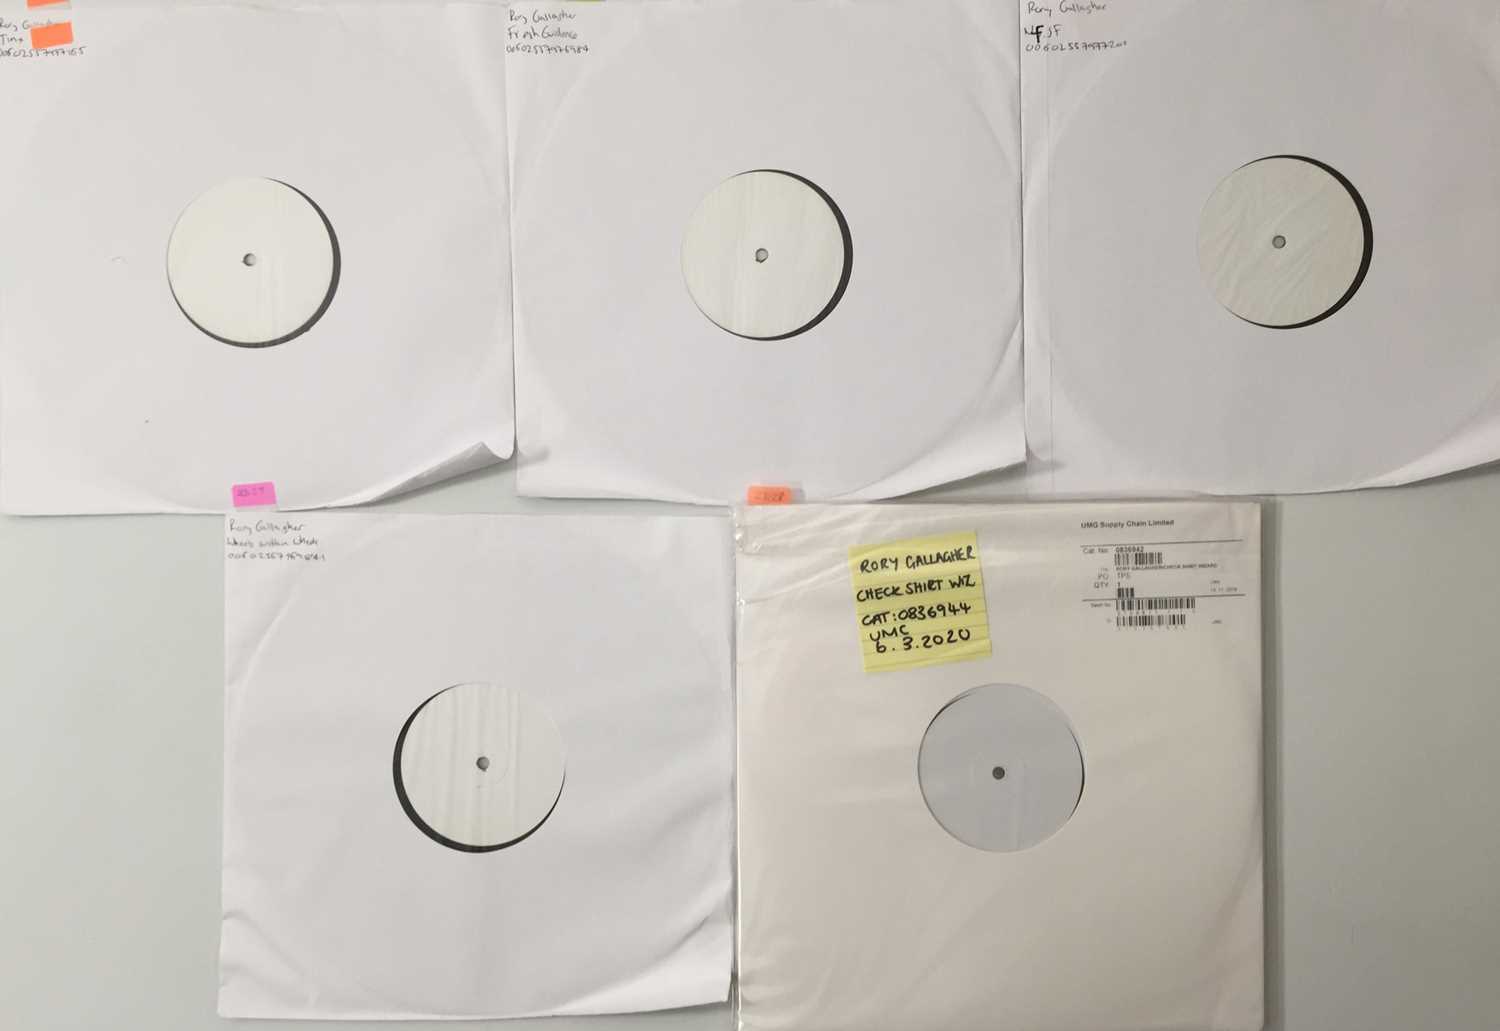 Lot 10 - RORY GALLAGHER - 2018 WHITE LABEL TEST PRESSING LPs